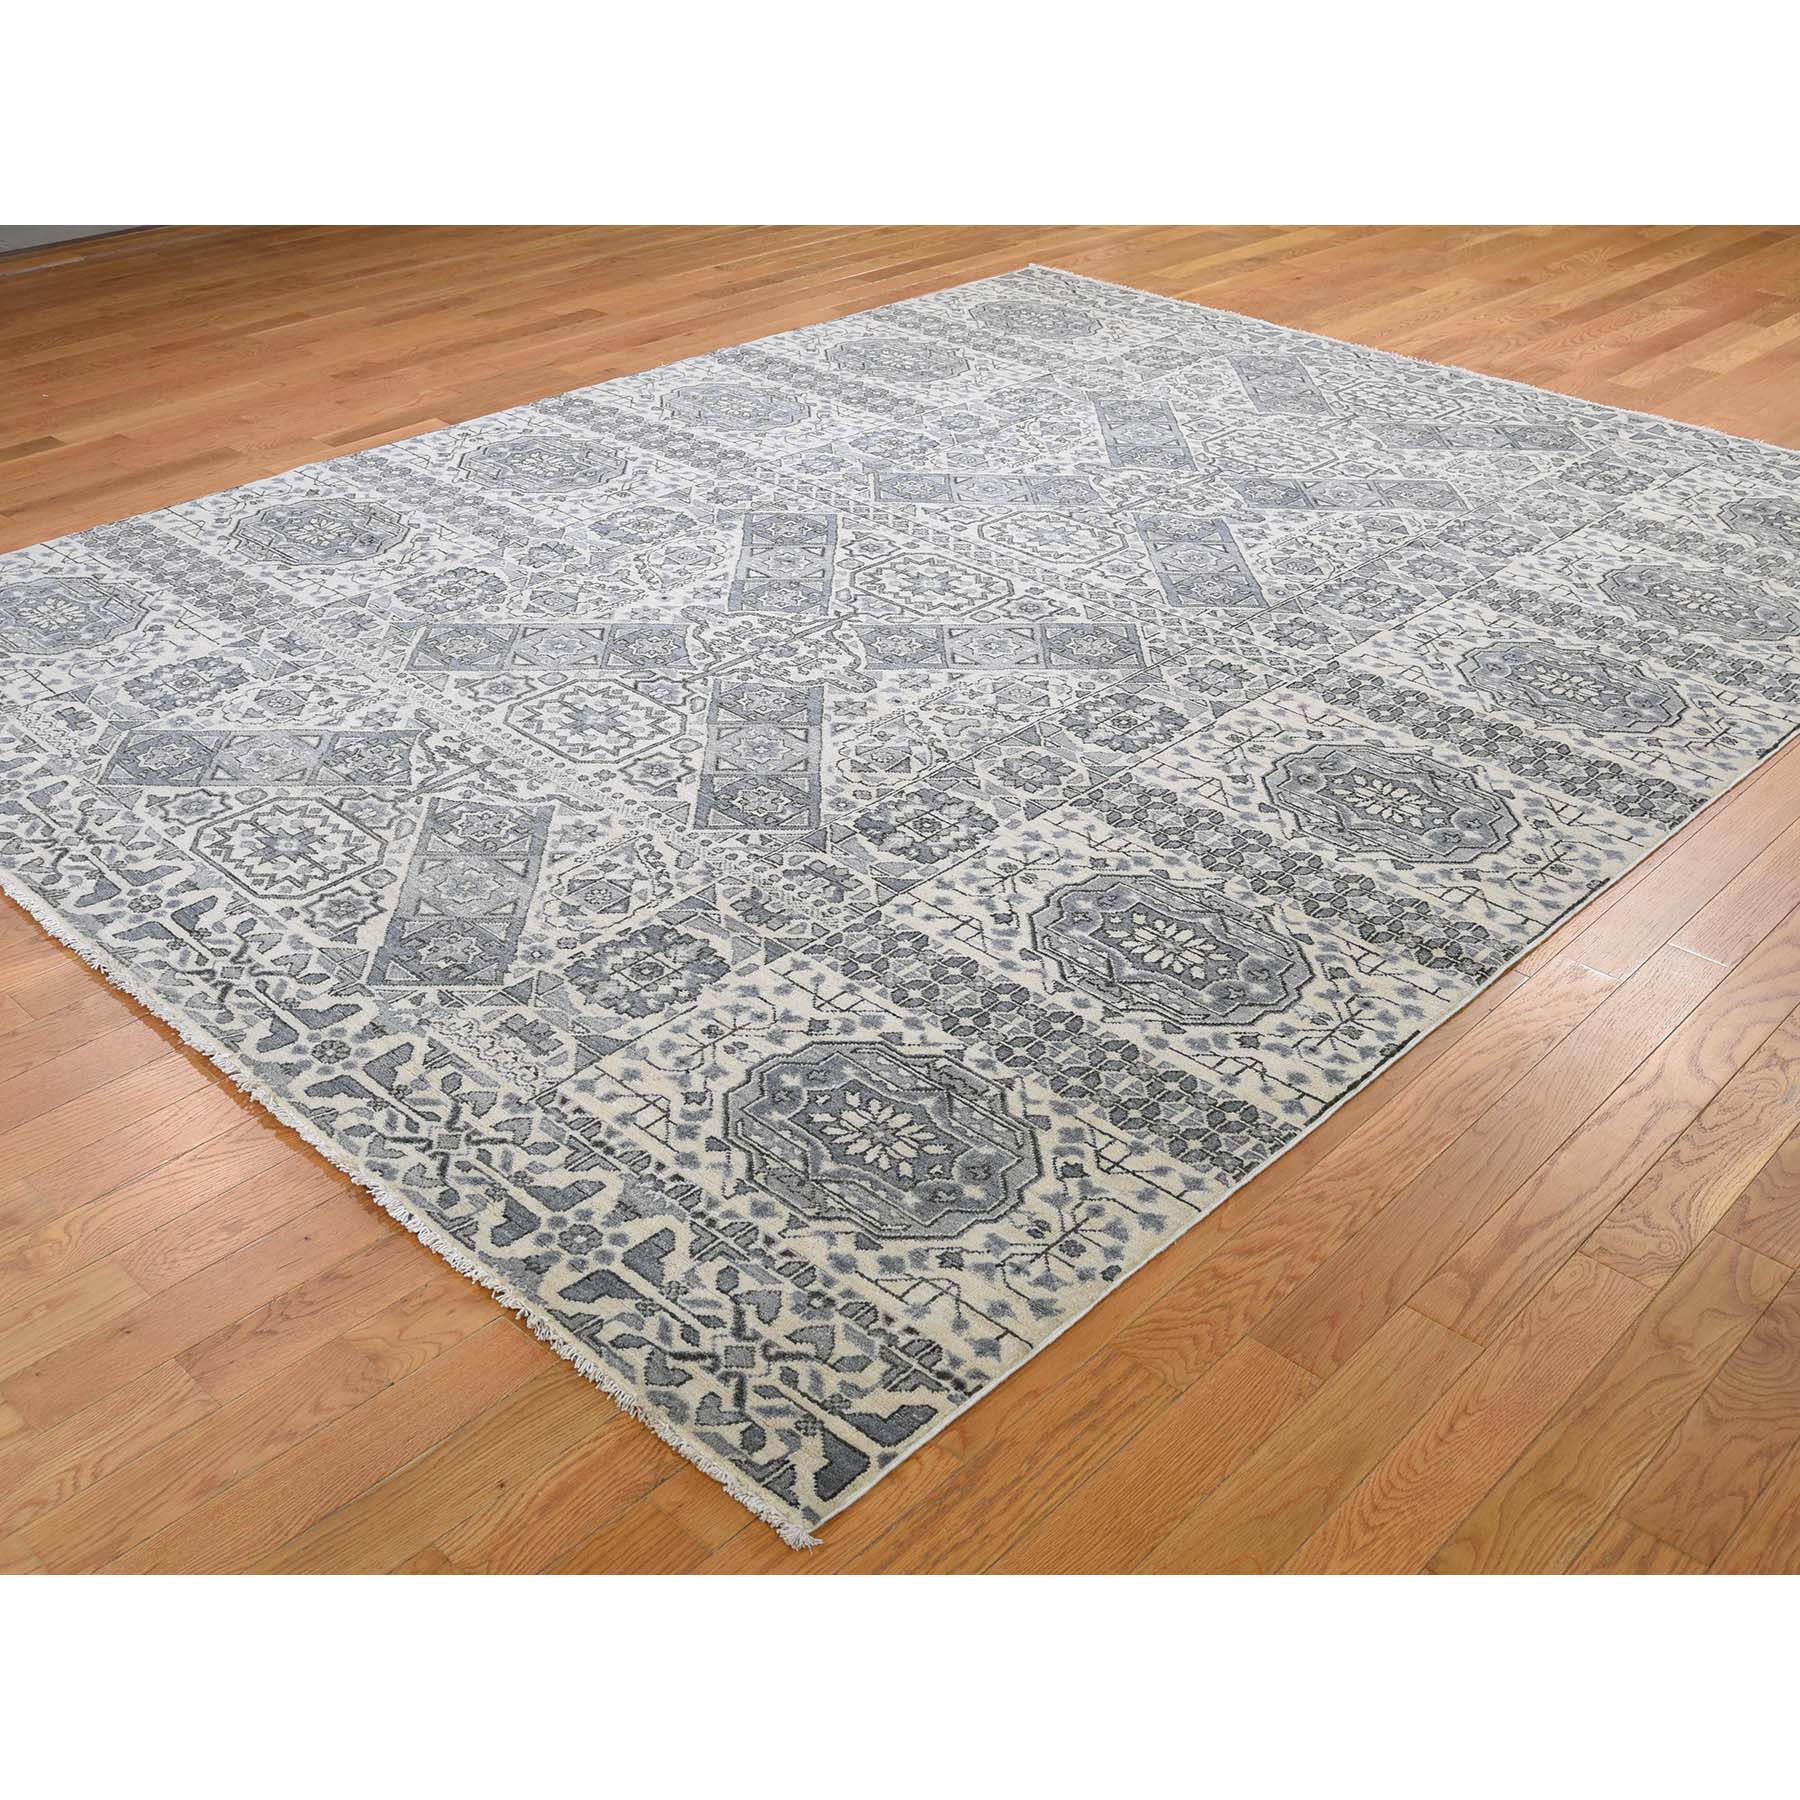 8-2 x10-5  Mamluk Design Hand-Knotted Undyed Natural Wool Oriental Rug 